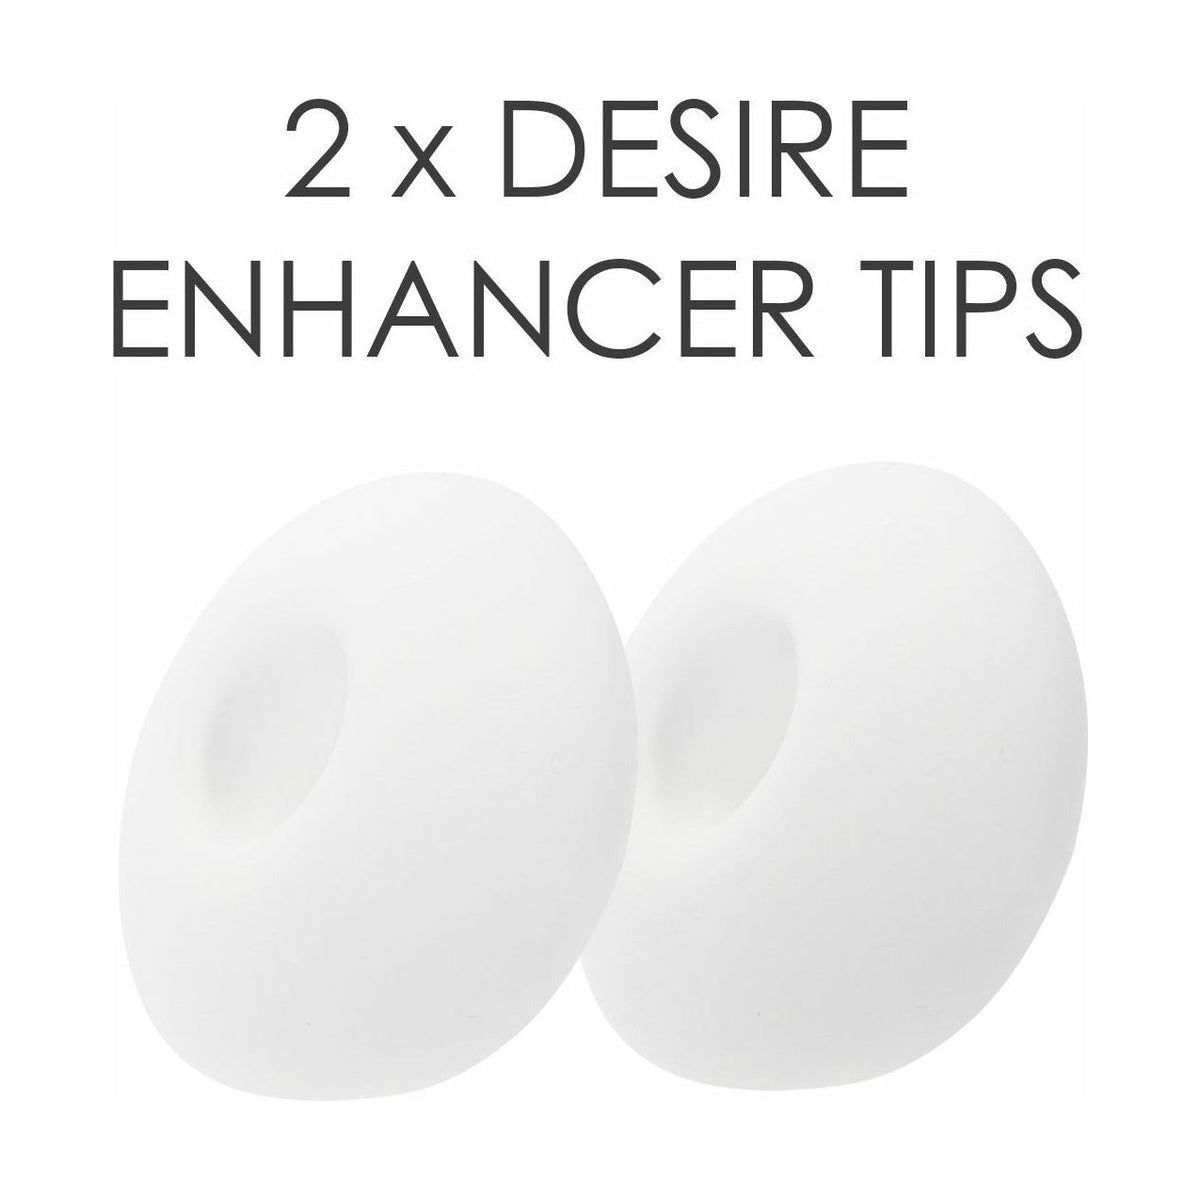 Satisfyer Pro 2 Tips - 3 Climax Tips and 2 Desire Enhancer Tips